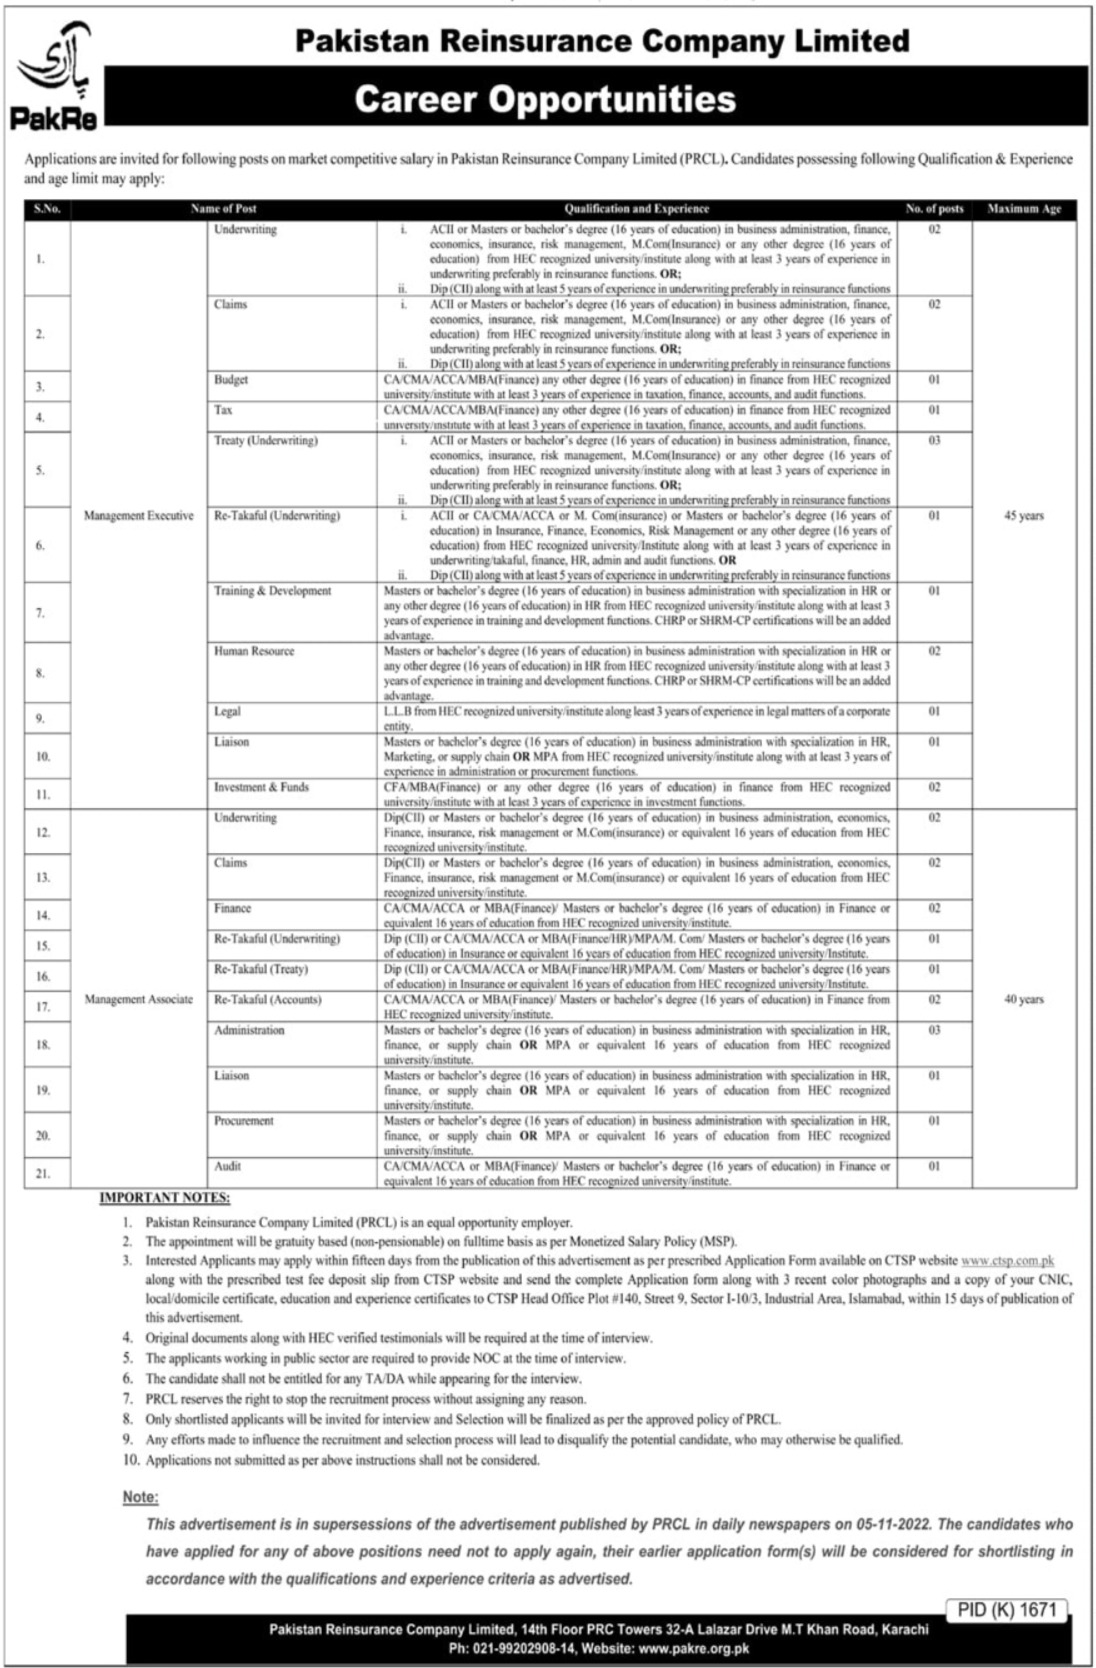 PRCL Jobs 2022 | Pakistan Reinsurance Company Limited Headquarters Announced Latest Hiring